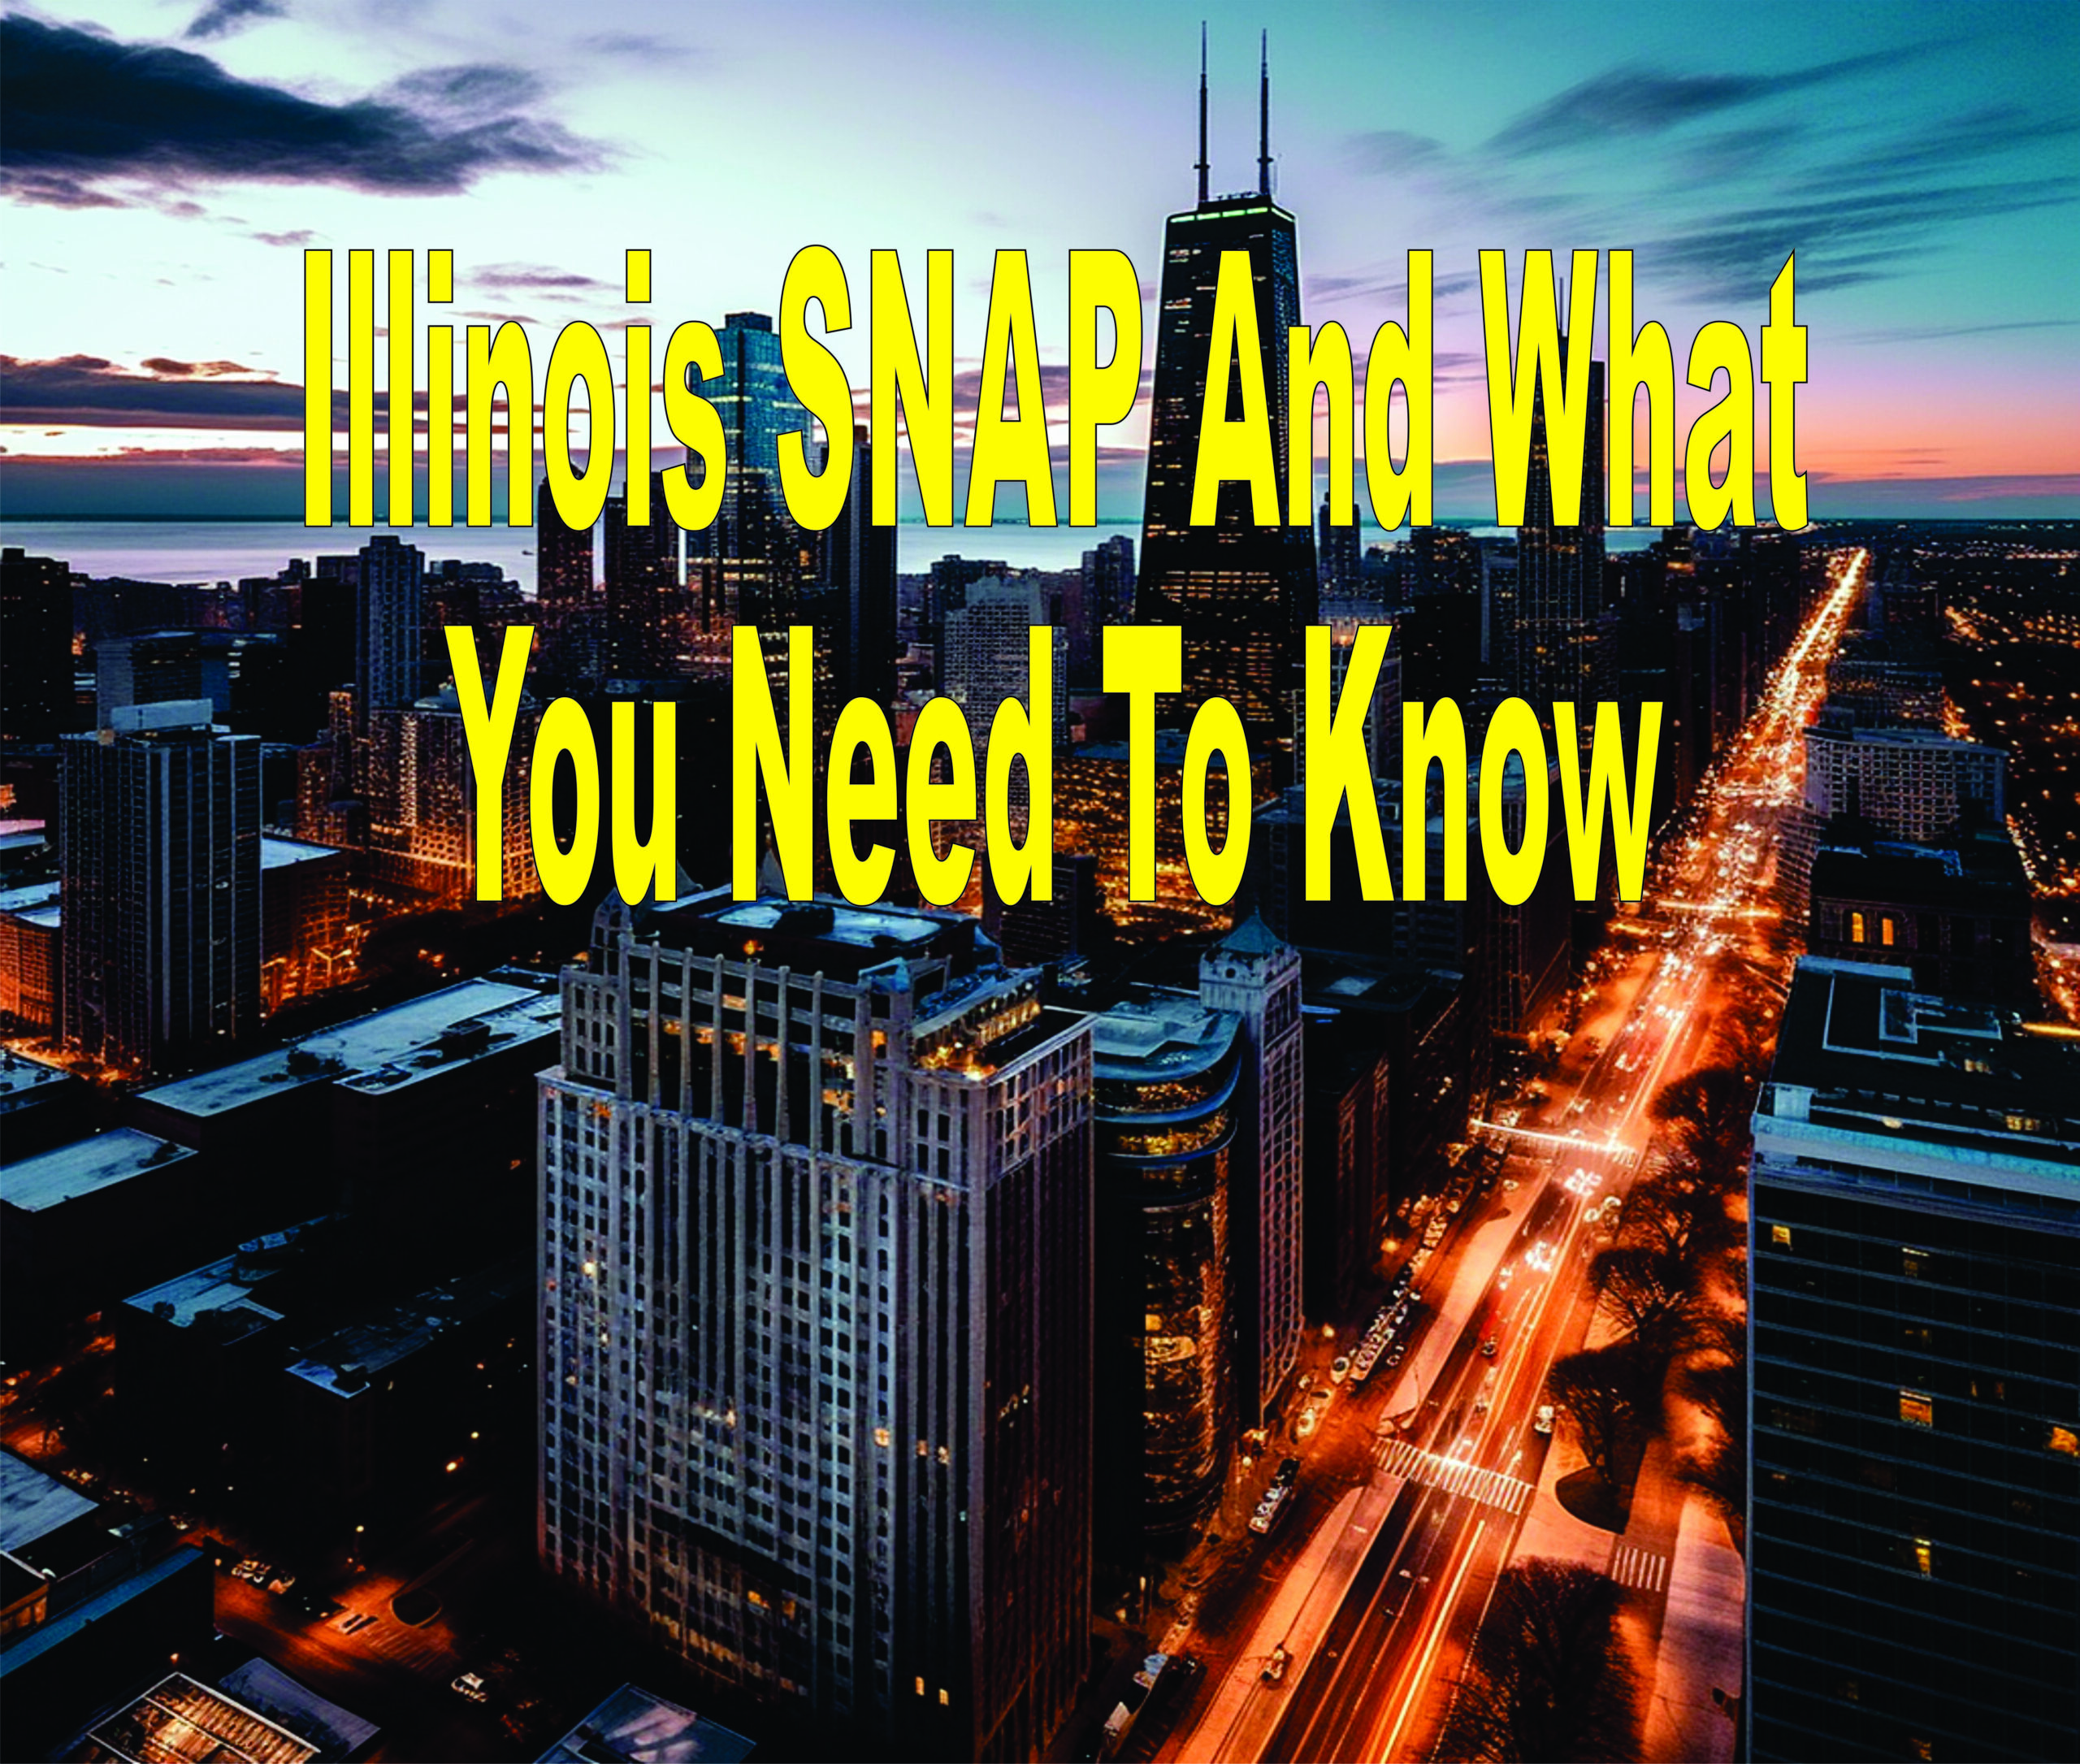 Illinois Snap And What You Need To Know